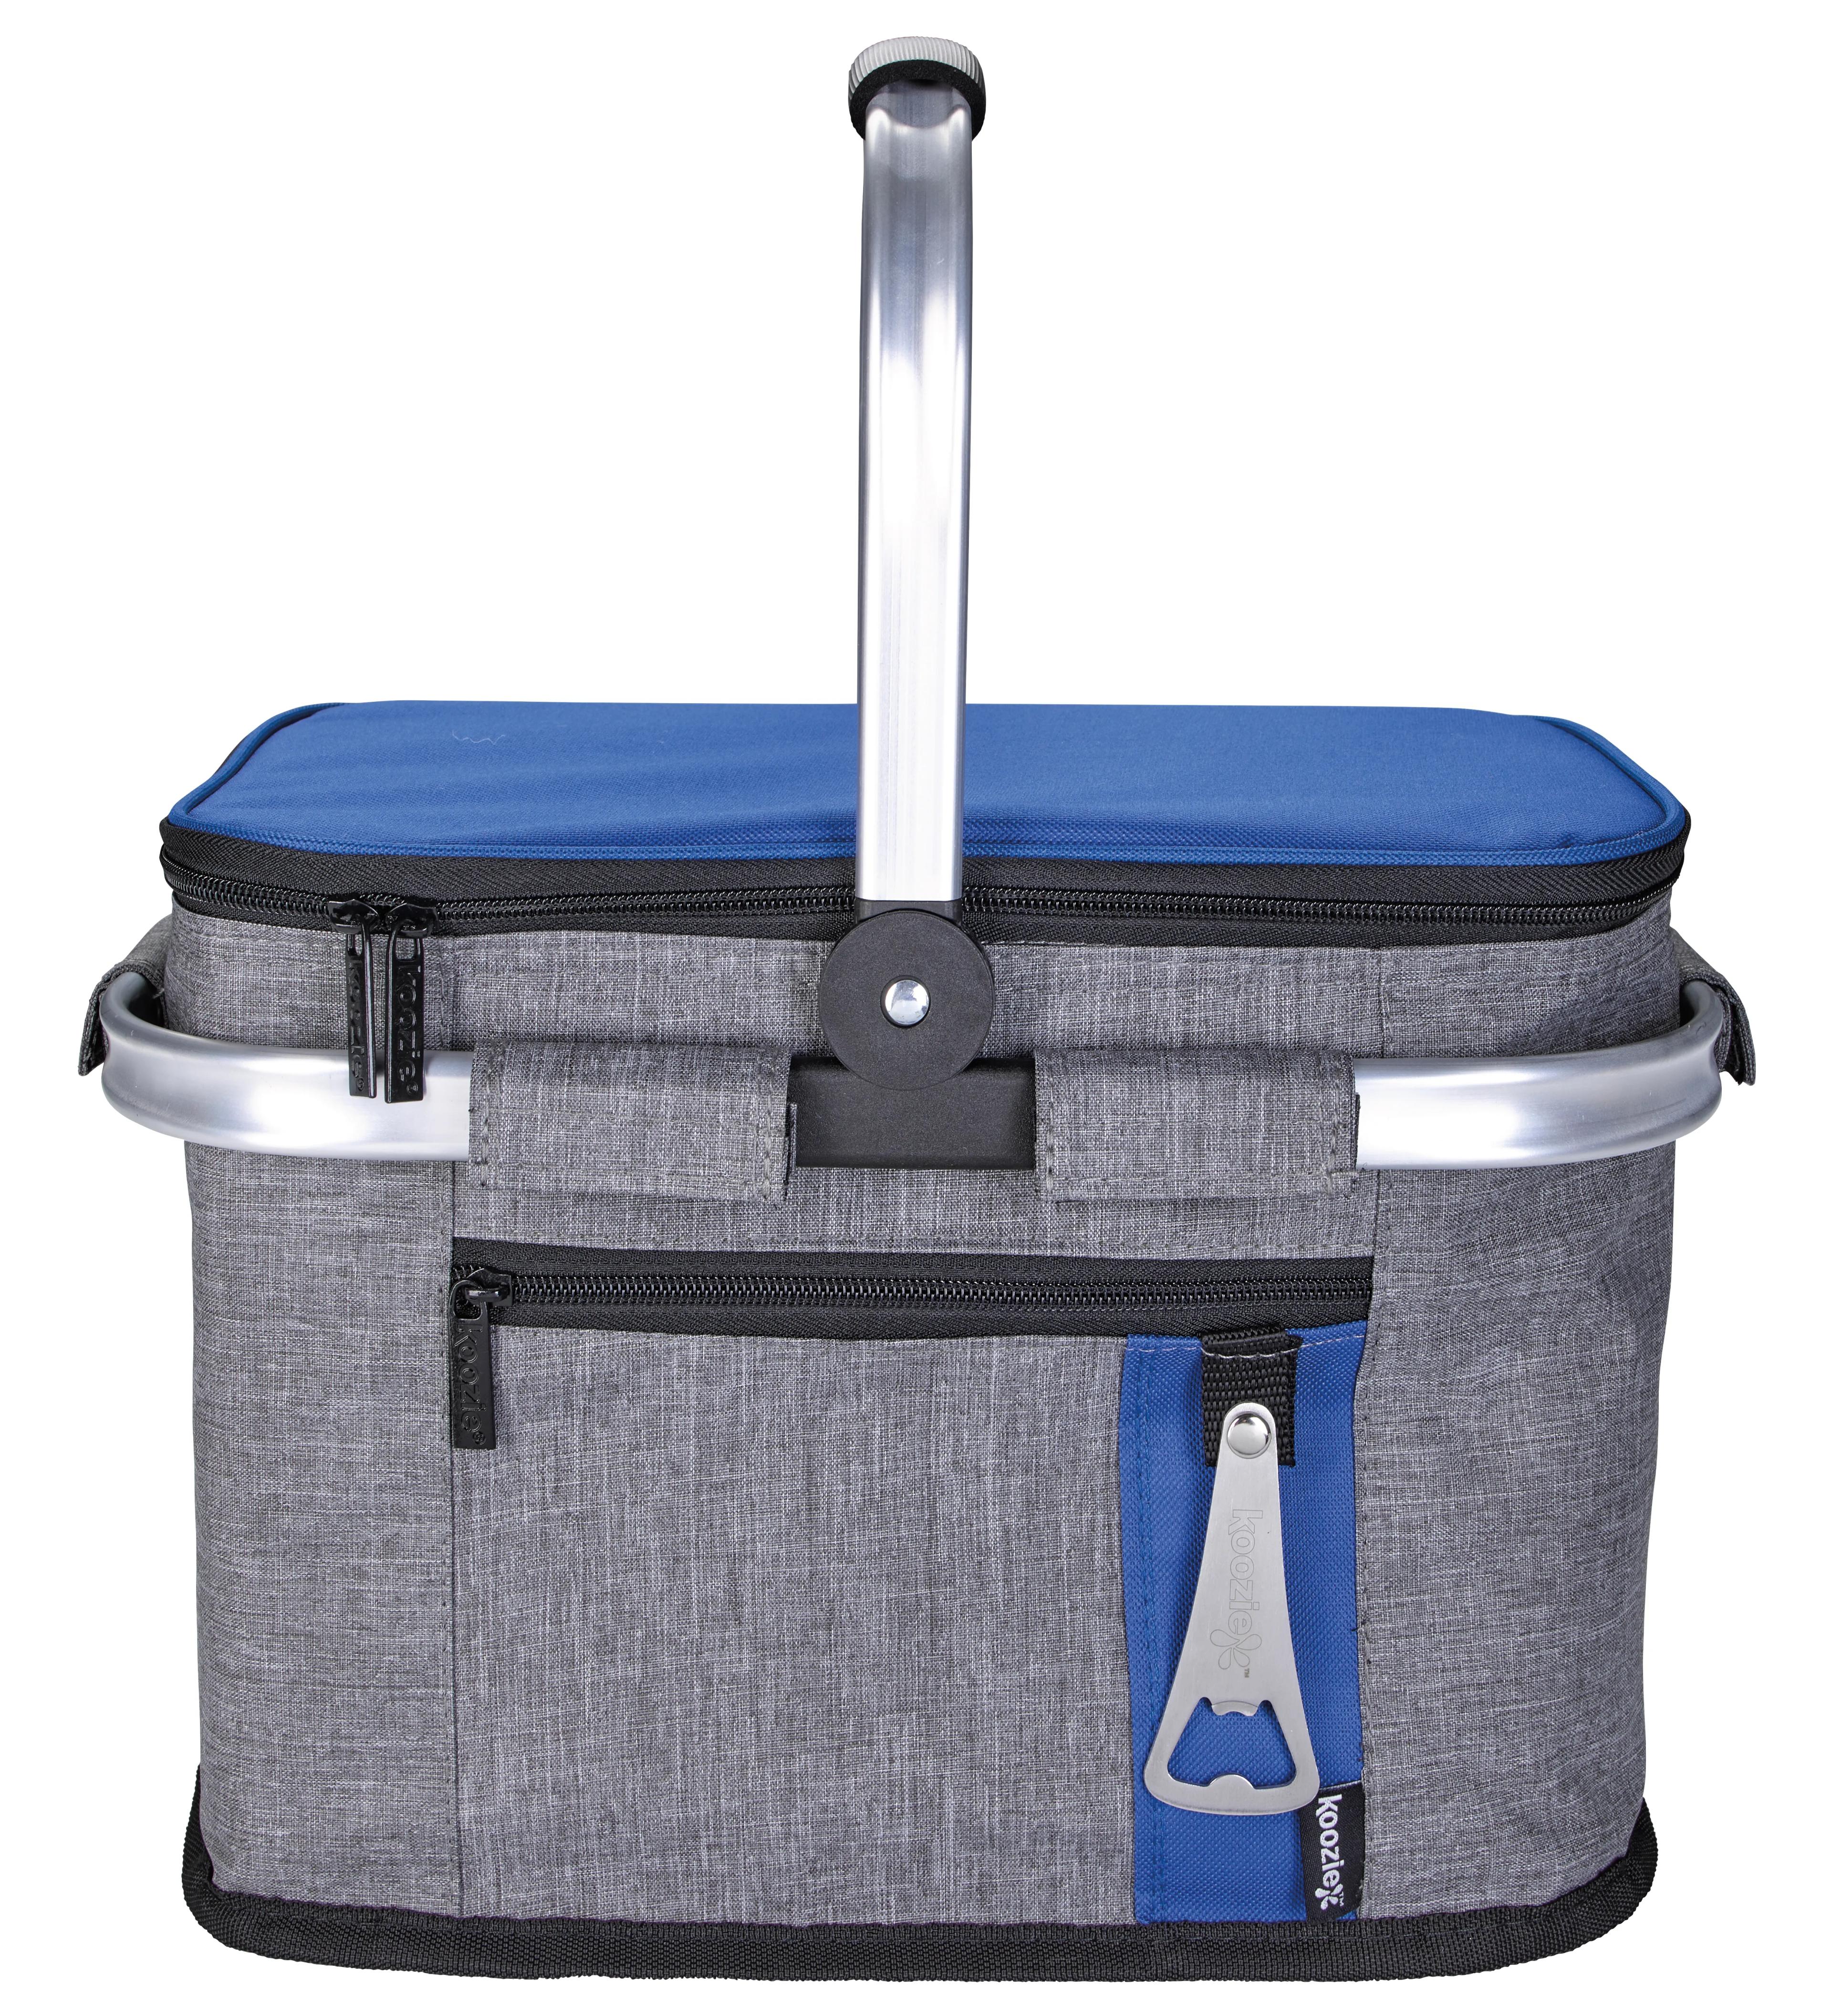 Koozie® Collapsible Picnic Basket